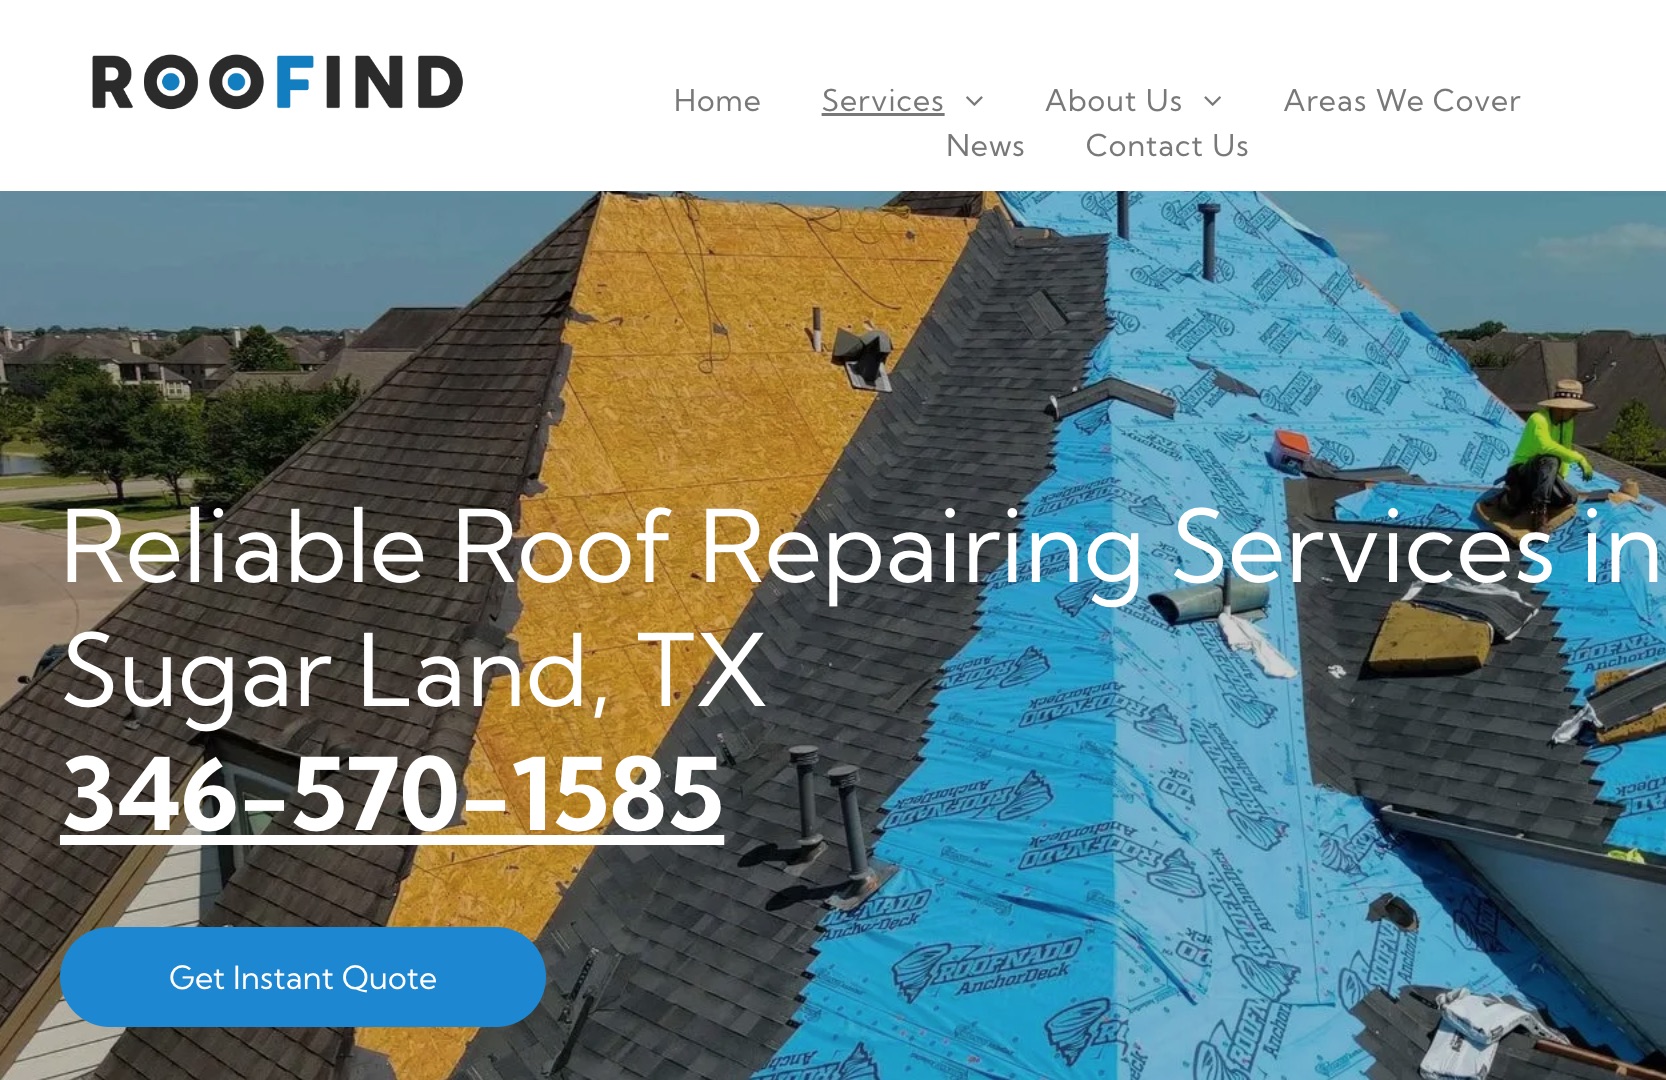 Roofind Houston: Where Quality Meets Dedication in Roofing Services